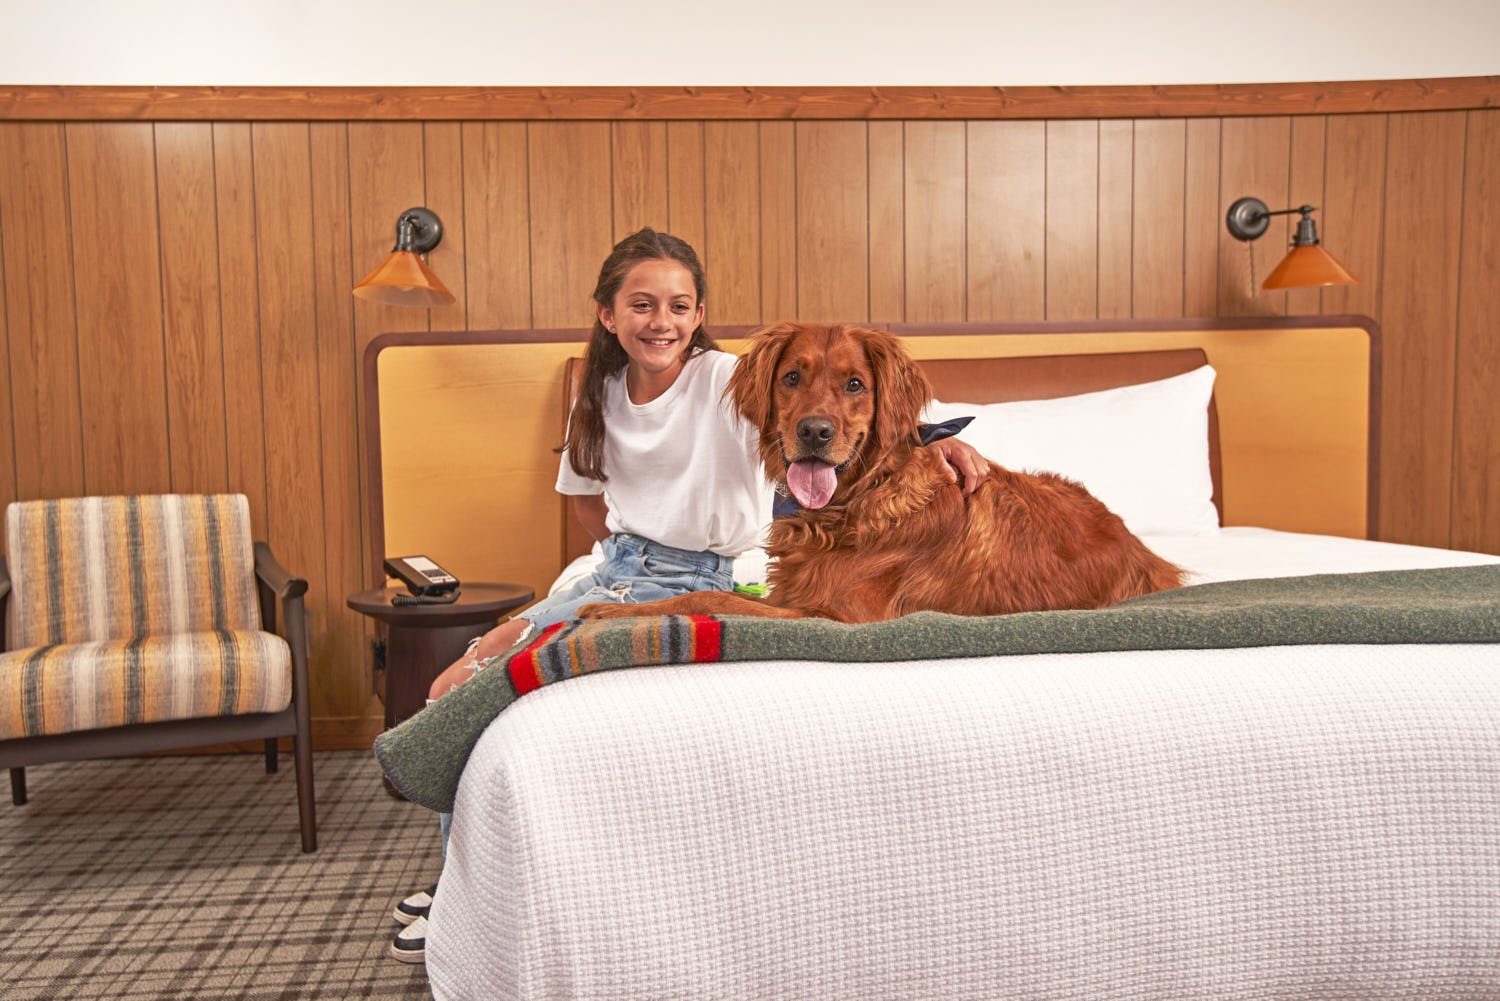 Knoxy_Knox_Lifestyle Photographer_Outbound Hotels_Summer_Mixed Race Family_Hotel_Jackson_Wyoming_Dog_0014.jpg